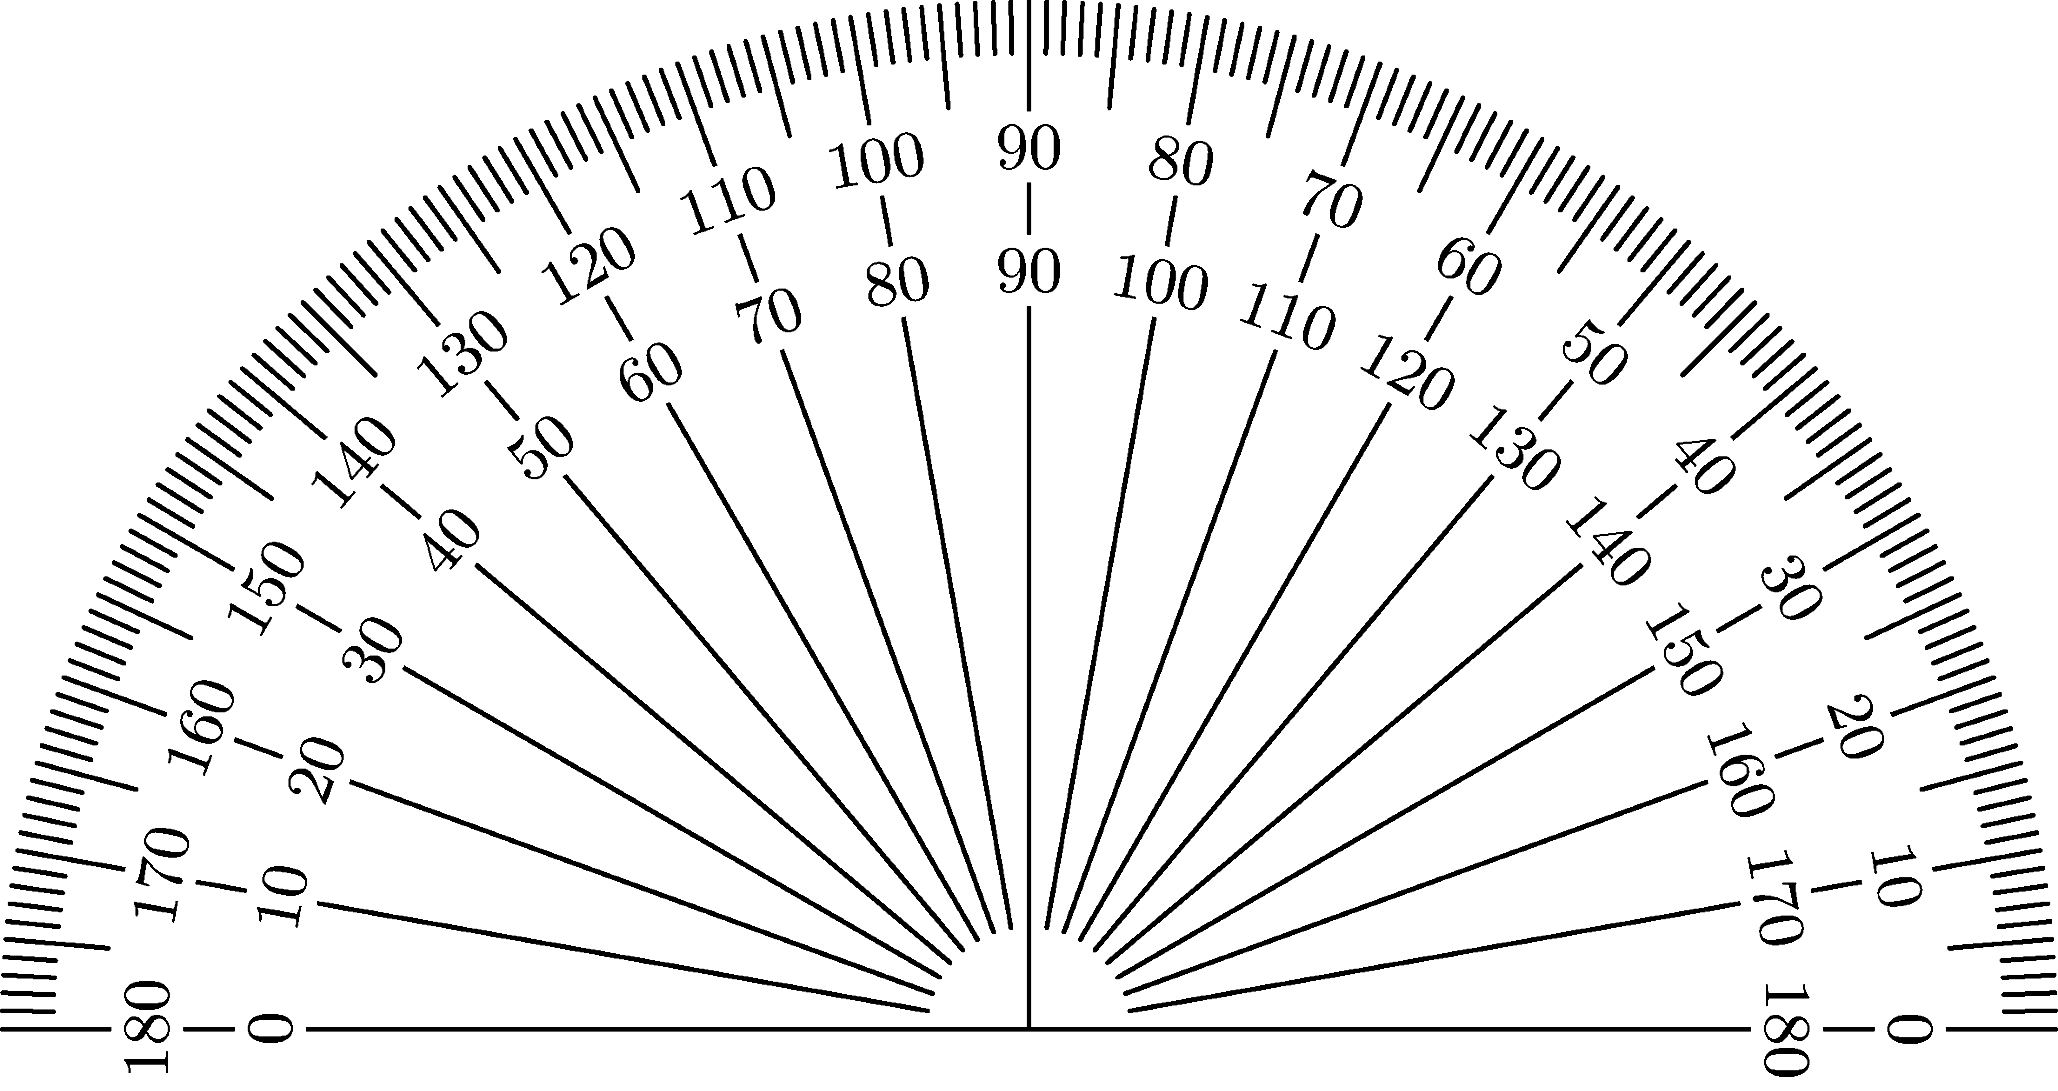 Free Printable Protractor 180 360 Pdf With Ruler Printable Ruler 